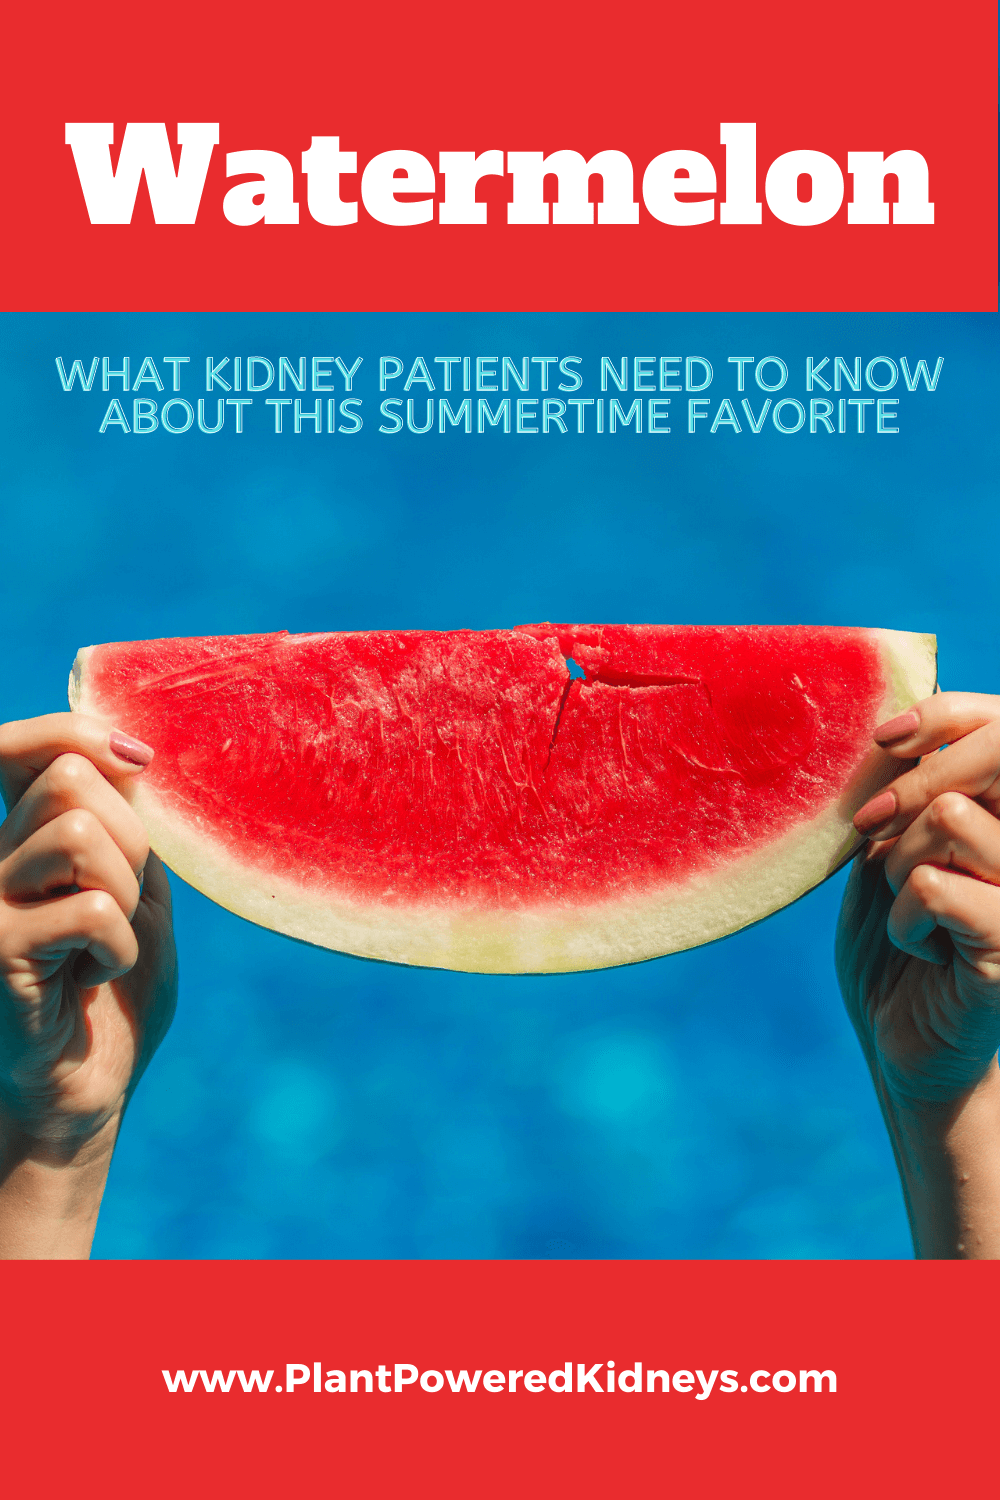 Everything kidney patients need to know about watermelon!